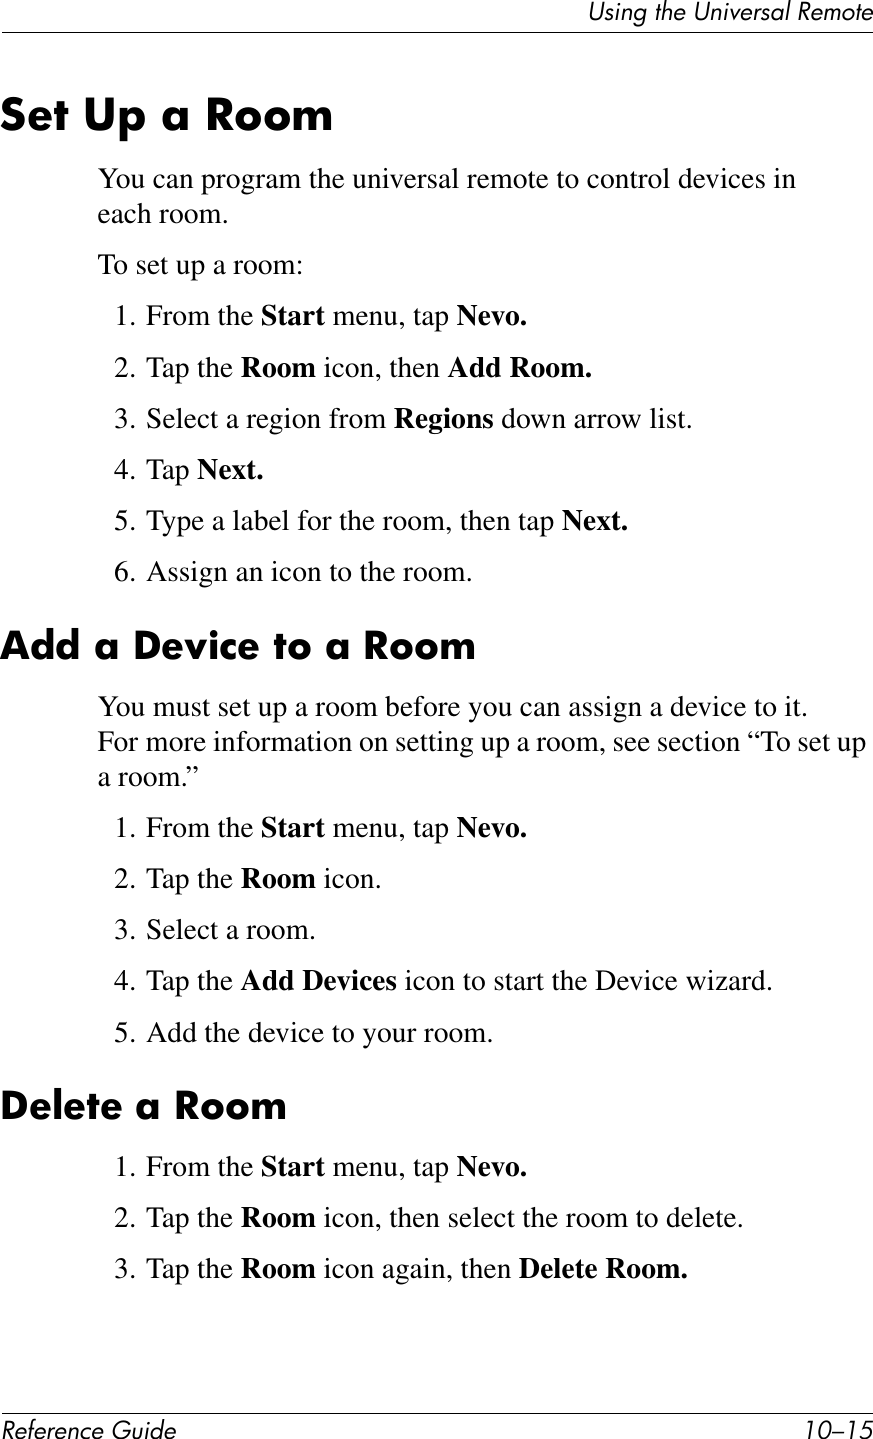 UL*%2&apos;1Q&quot;&apos;U%*,&quot;$L4K&apos;!&quot;?71&quot;!&quot;#&quot;$&quot;%&amp;&quot;&apos;()*+&quot; .I/.D:&quot;7&amp;3F&amp;;&amp;-66IYou can program the universal remote to control devices in each room.To set up a room:1. From the Start menu, tap Nevo.2. Tap the Room icon, then Add Room.3. Select a region from Regions down arrow list.4. Tap Next.5. Type a label for the room, then tap Next.6. Assign an icon to the room.,**&amp;;&amp;U&quot;N)%&quot;&amp;76&amp;;&amp;-66IYou must set up a room before you can assign a device to it. For more information on setting up a room, see section “To set up a room.”1. From the Start menu, tap Nevo.2. Tap the Room icon.3. Select a room.4. Tap the Add Devices icon to start the Device wizard.5. Add the device to your room.U&quot;@&quot;7&quot;&amp;;&amp;-66I1. From the Start menu, tap Nevo.2. Tap the Room icon, then select the room to delete.3. Tap the Room icon again, then Delete Room.